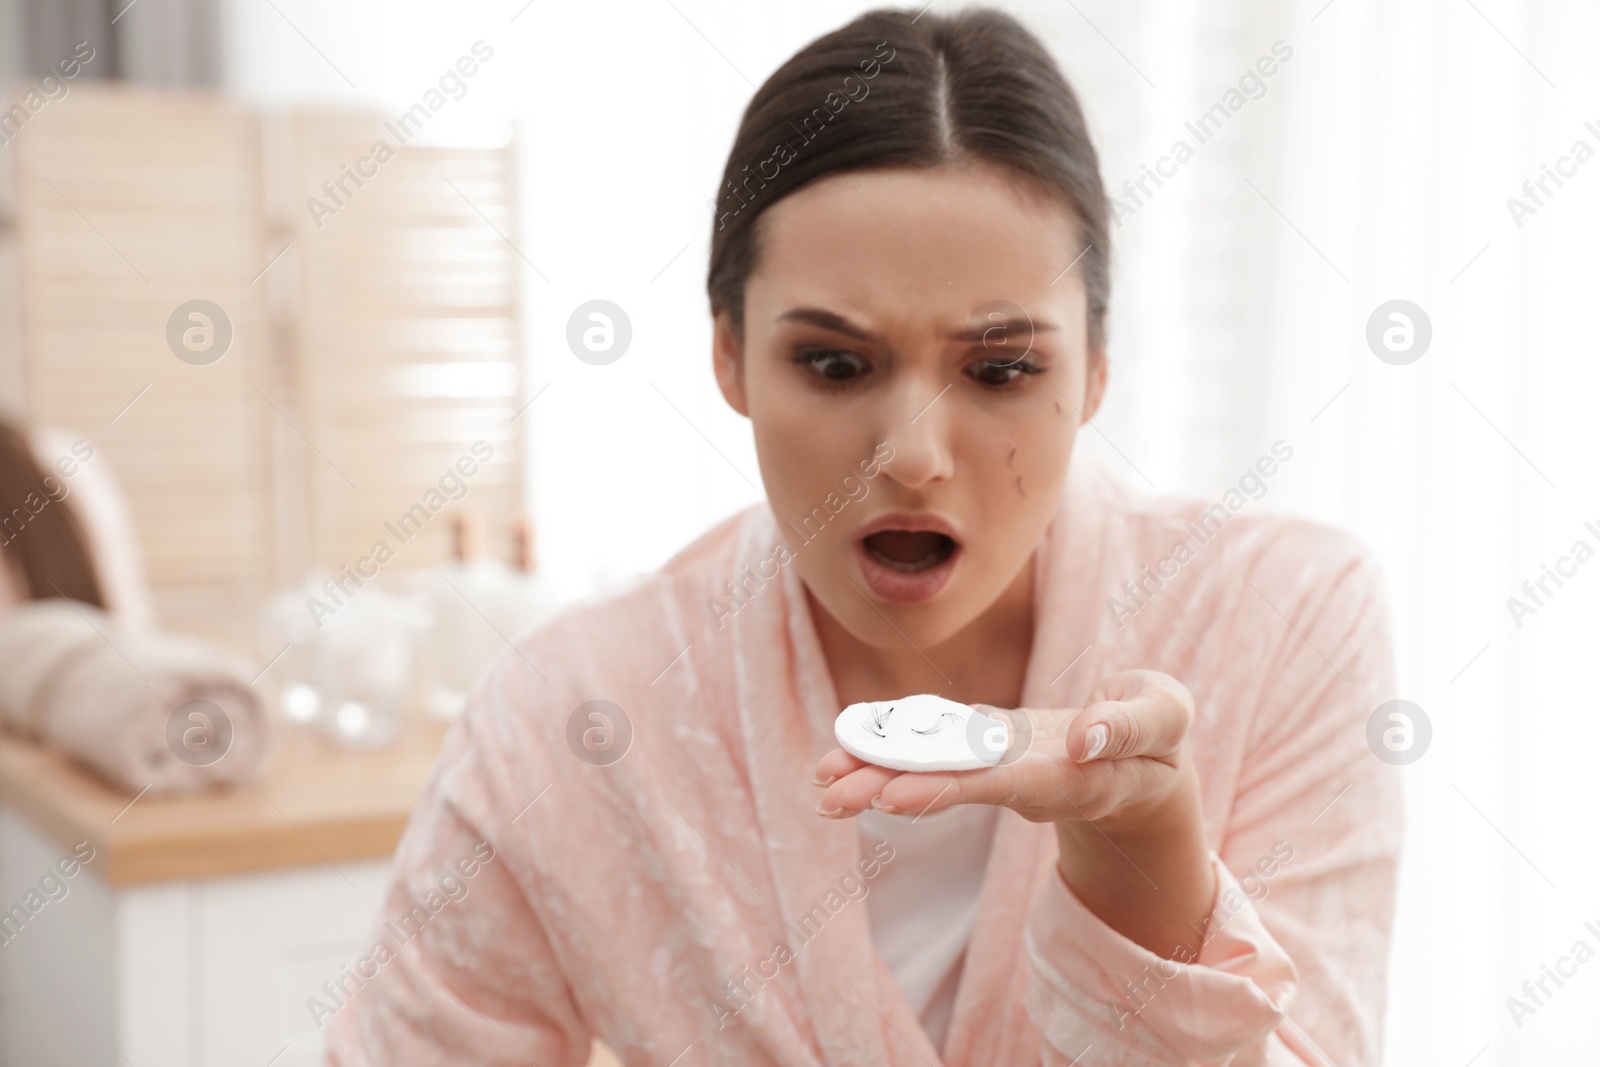 Photo of Beautiful woman holding cotton pad with fallen eyelashes indoors